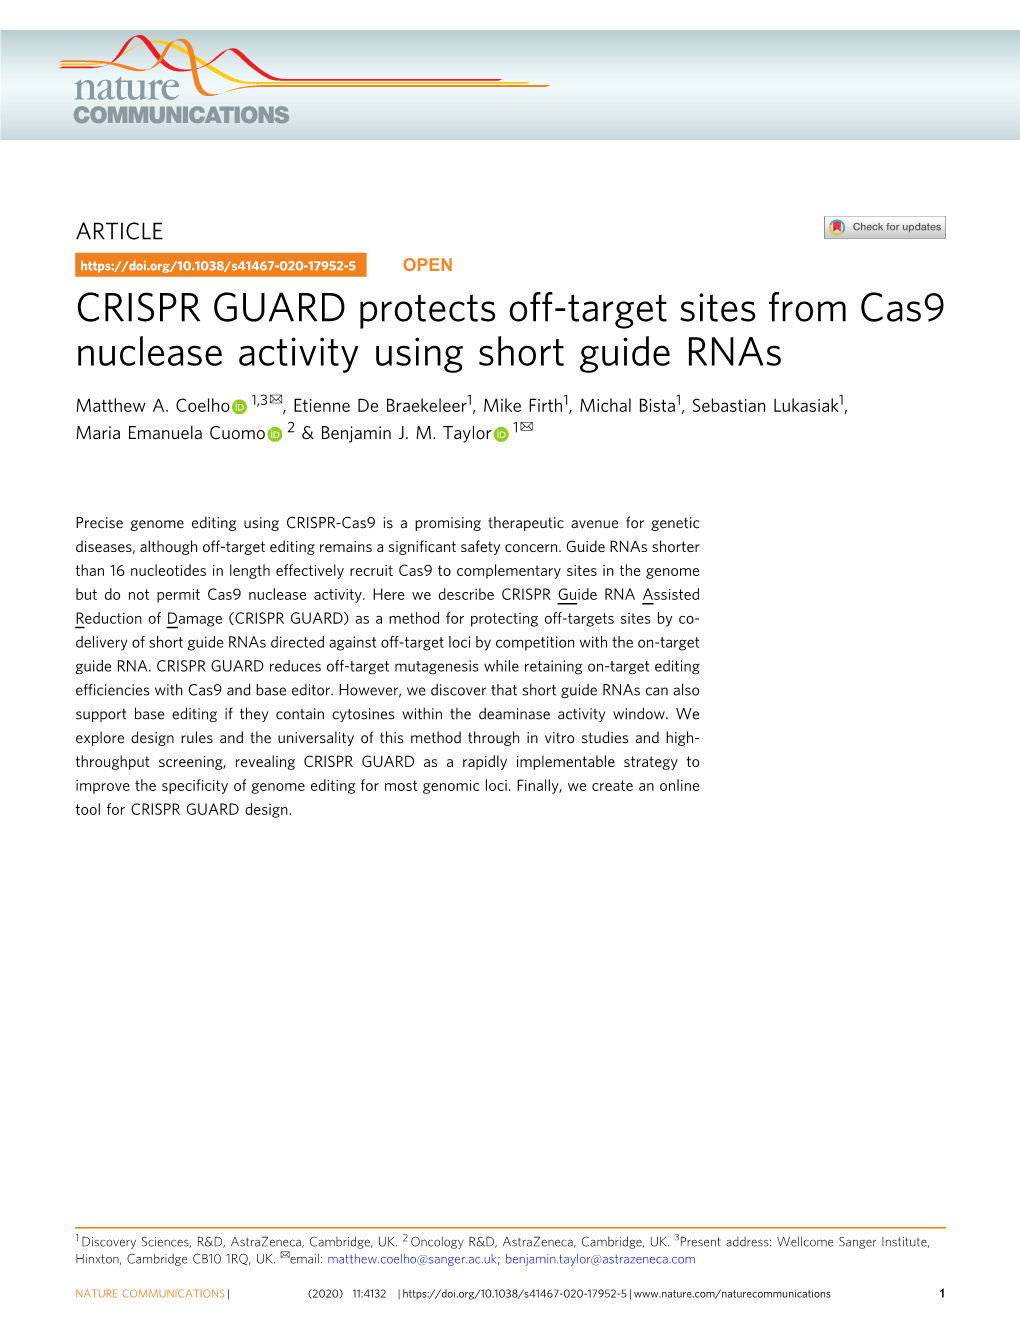 CRISPR GUARD Protects Off-Target Sites from Cas9 Nuclease Activity Using Short Guide Rnas ✉ Matthew A